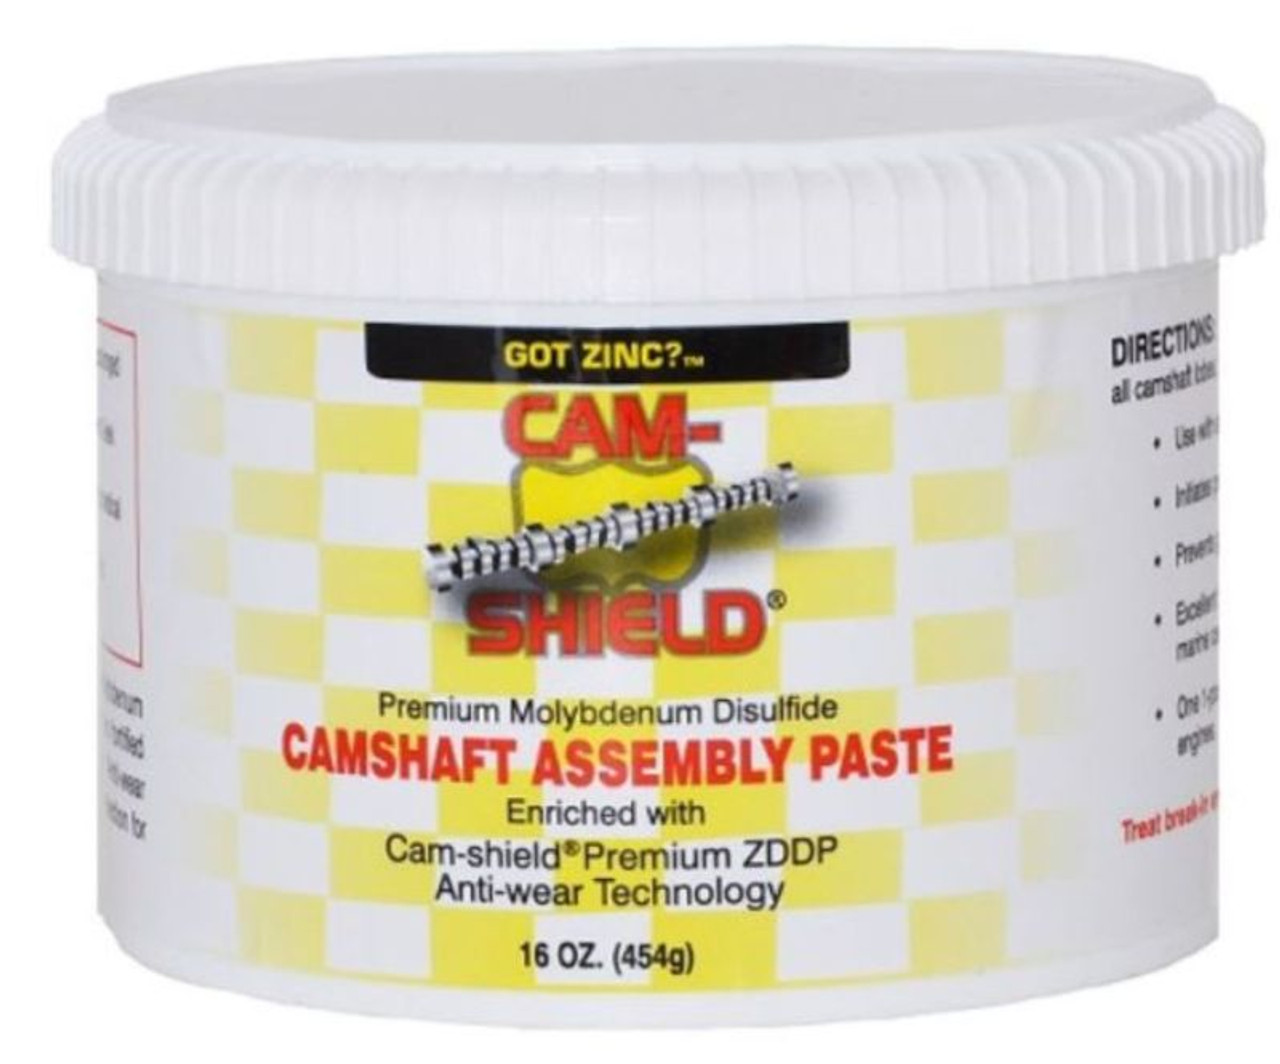 1985 Cadillac Fleetwood 4.1L Engine Camshaft Assembly Paste ZMOLY-1 -14154